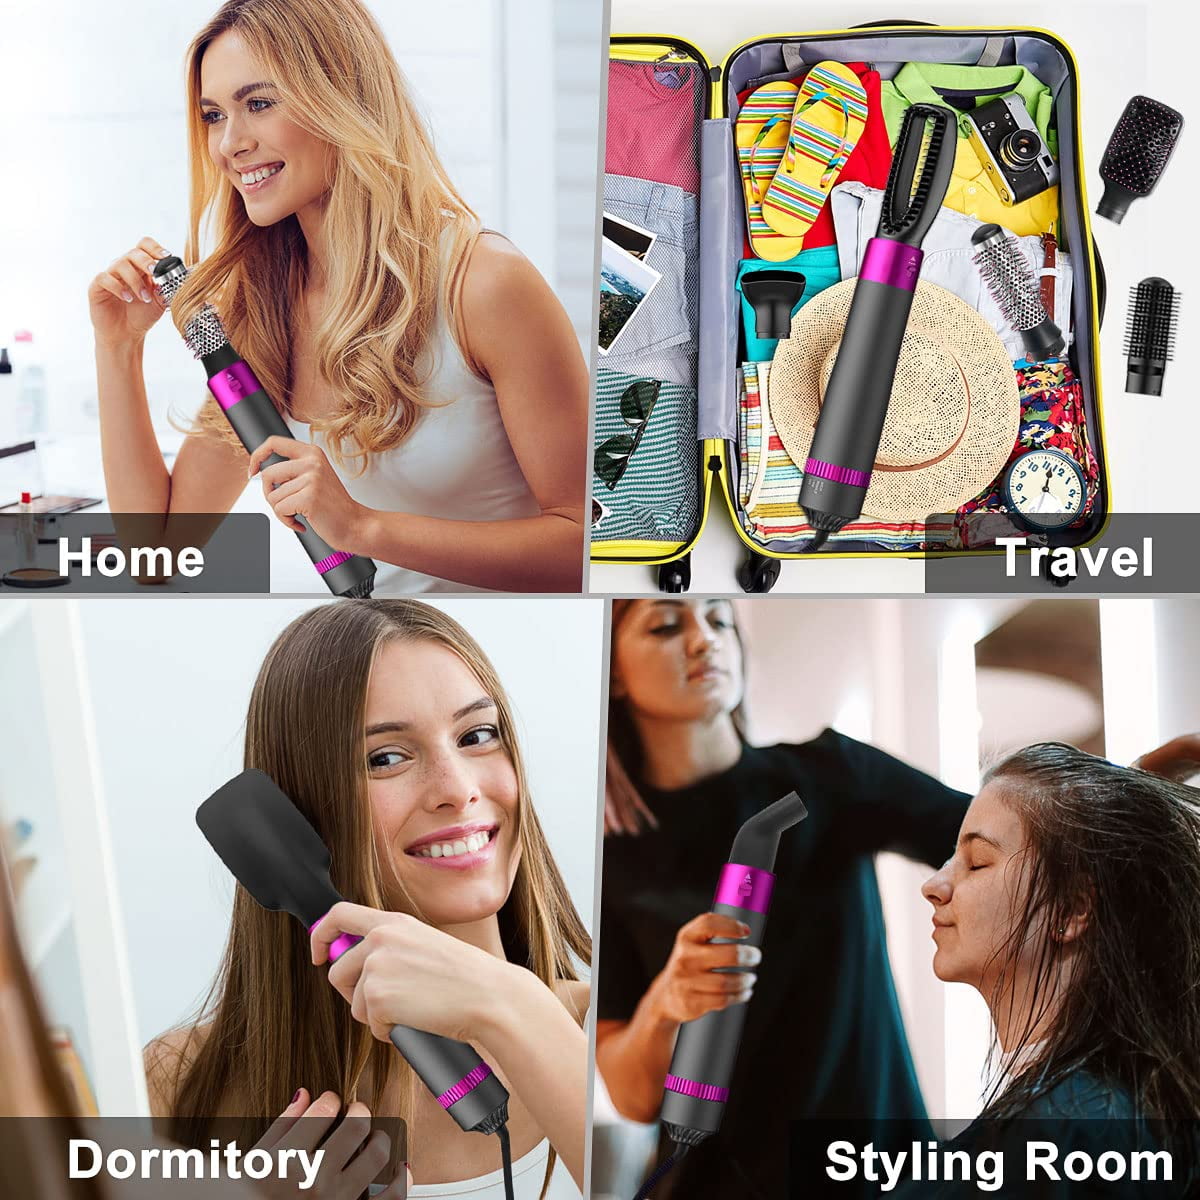 One Step - 5 In 1 Multifunctional Hair Dryer Styling Tool (FREE DELIVE –  Clever Closet